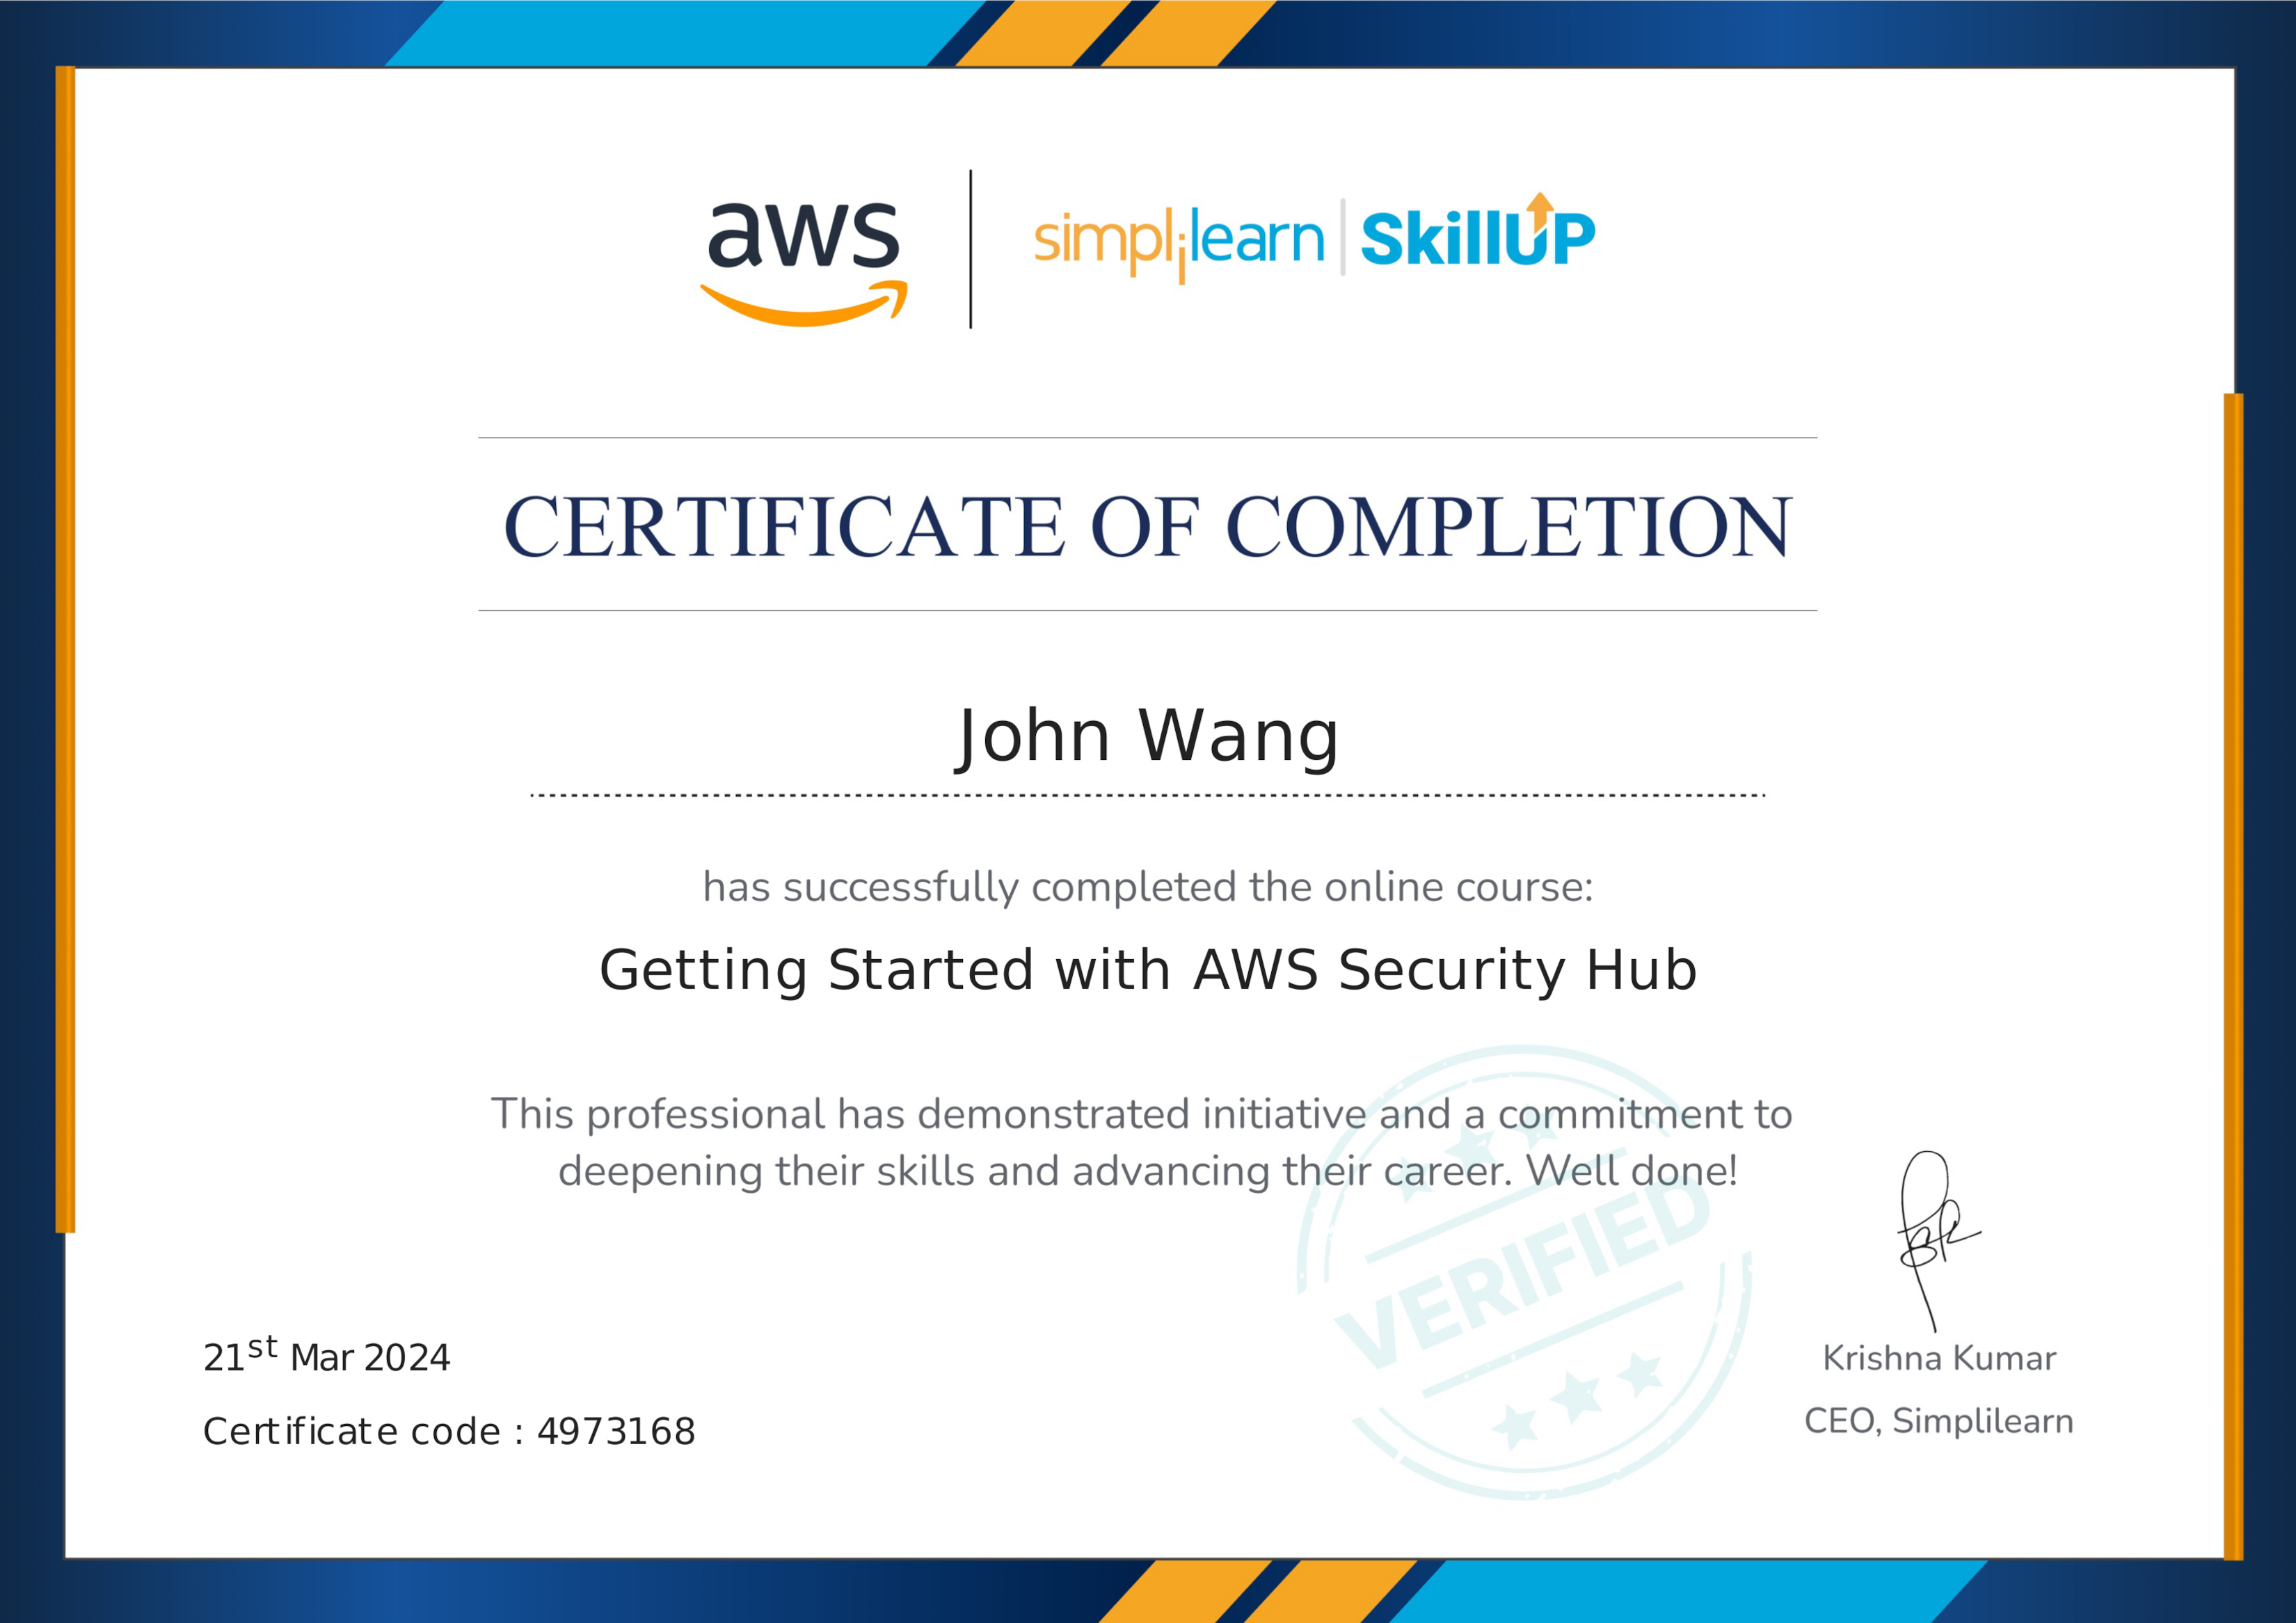 John's Getting Started with AWS Security Hub from Simplilearn